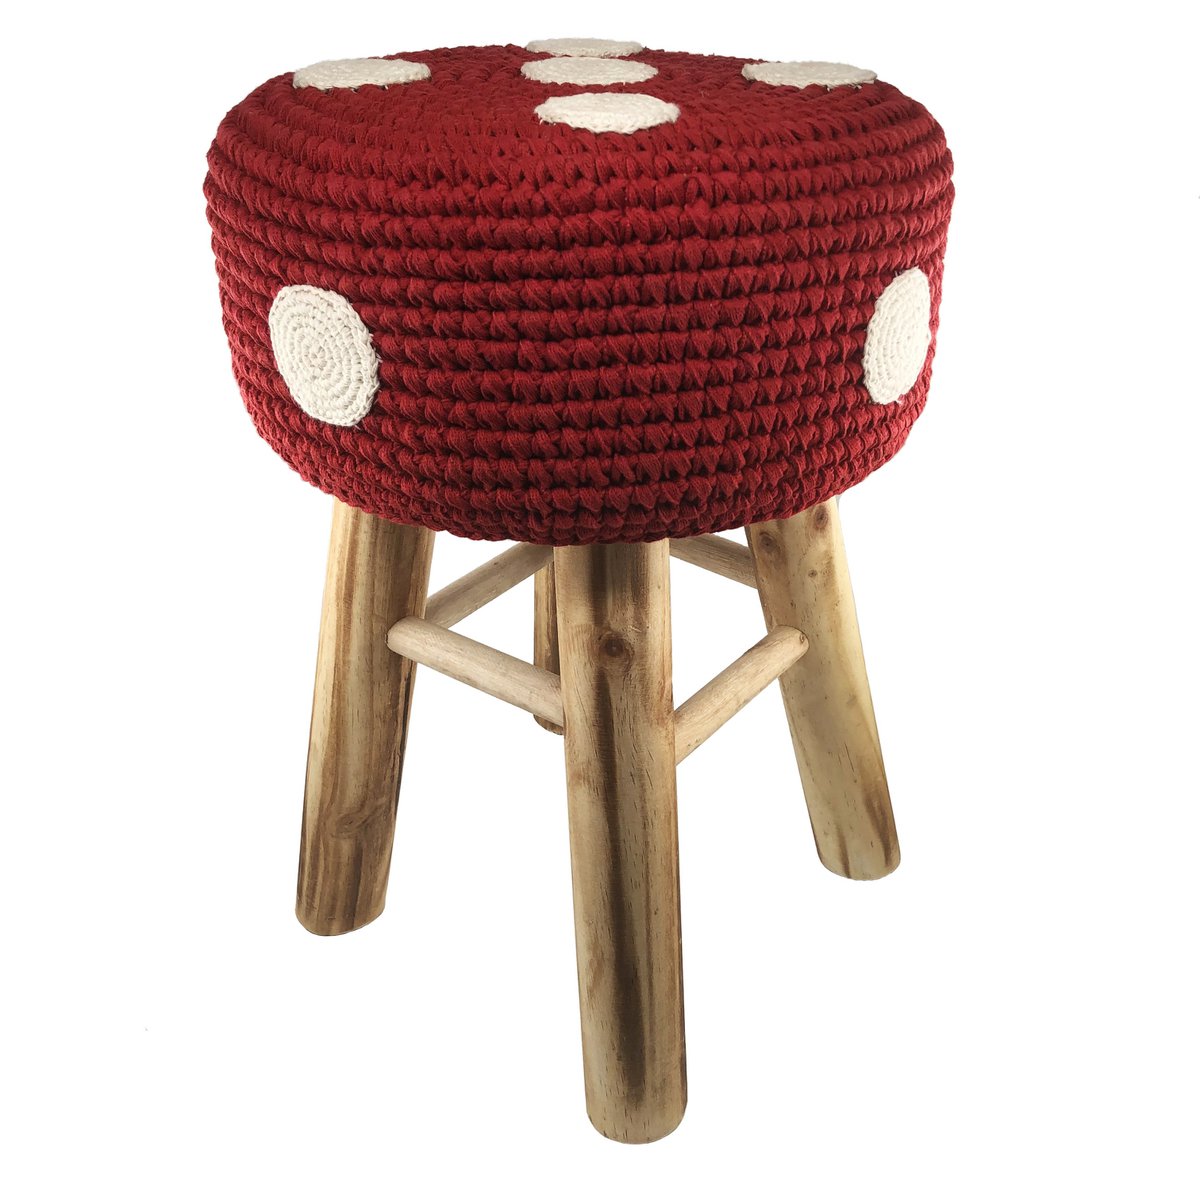 Luna-Leena stool with a mushroom cover red -  cotton & wood - hand crochet in Nepal